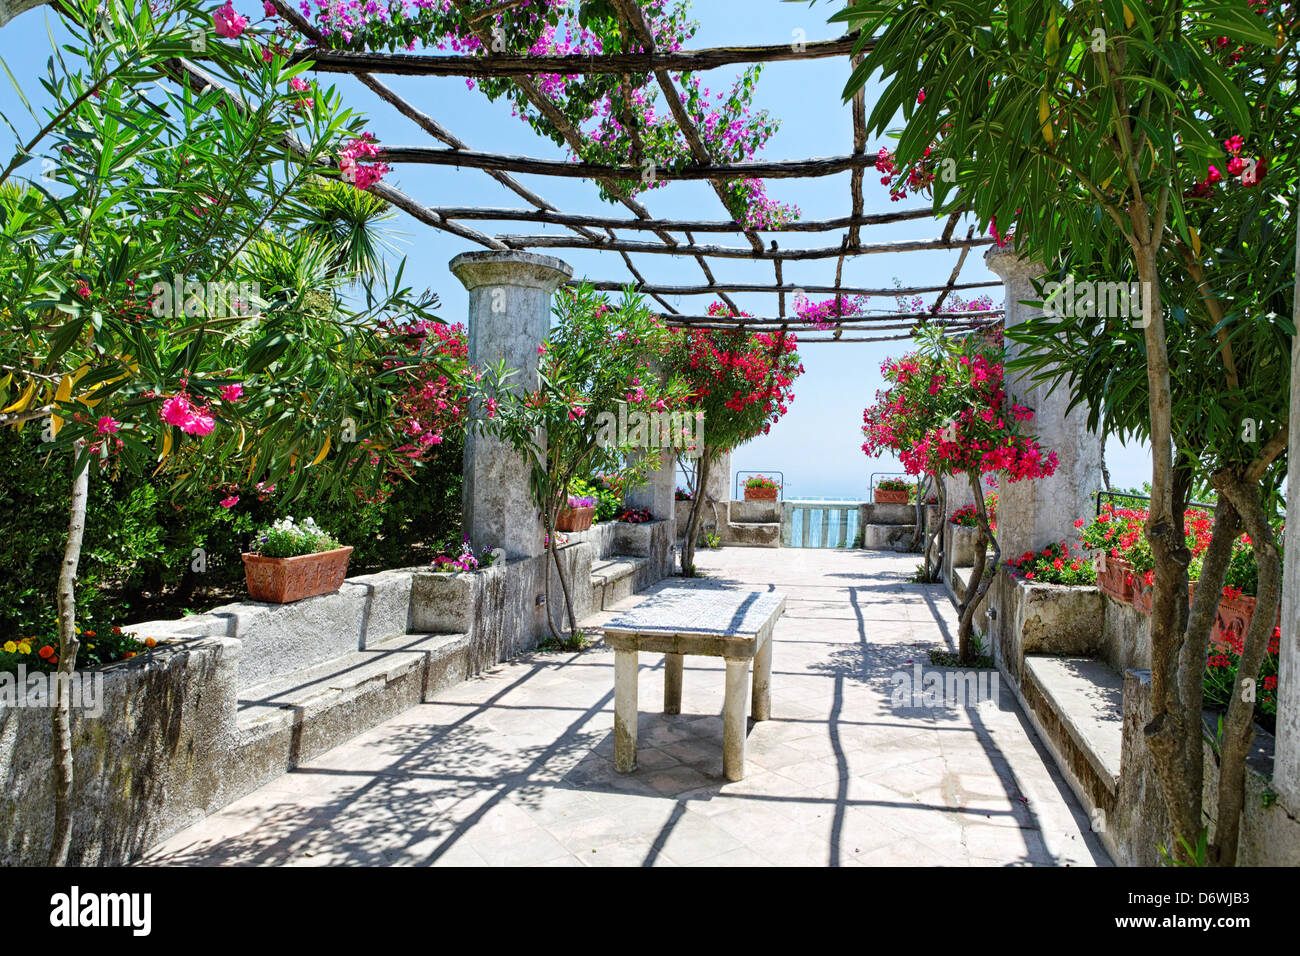 Premium Photo  Mediterranean culture terrace with flowers and sea